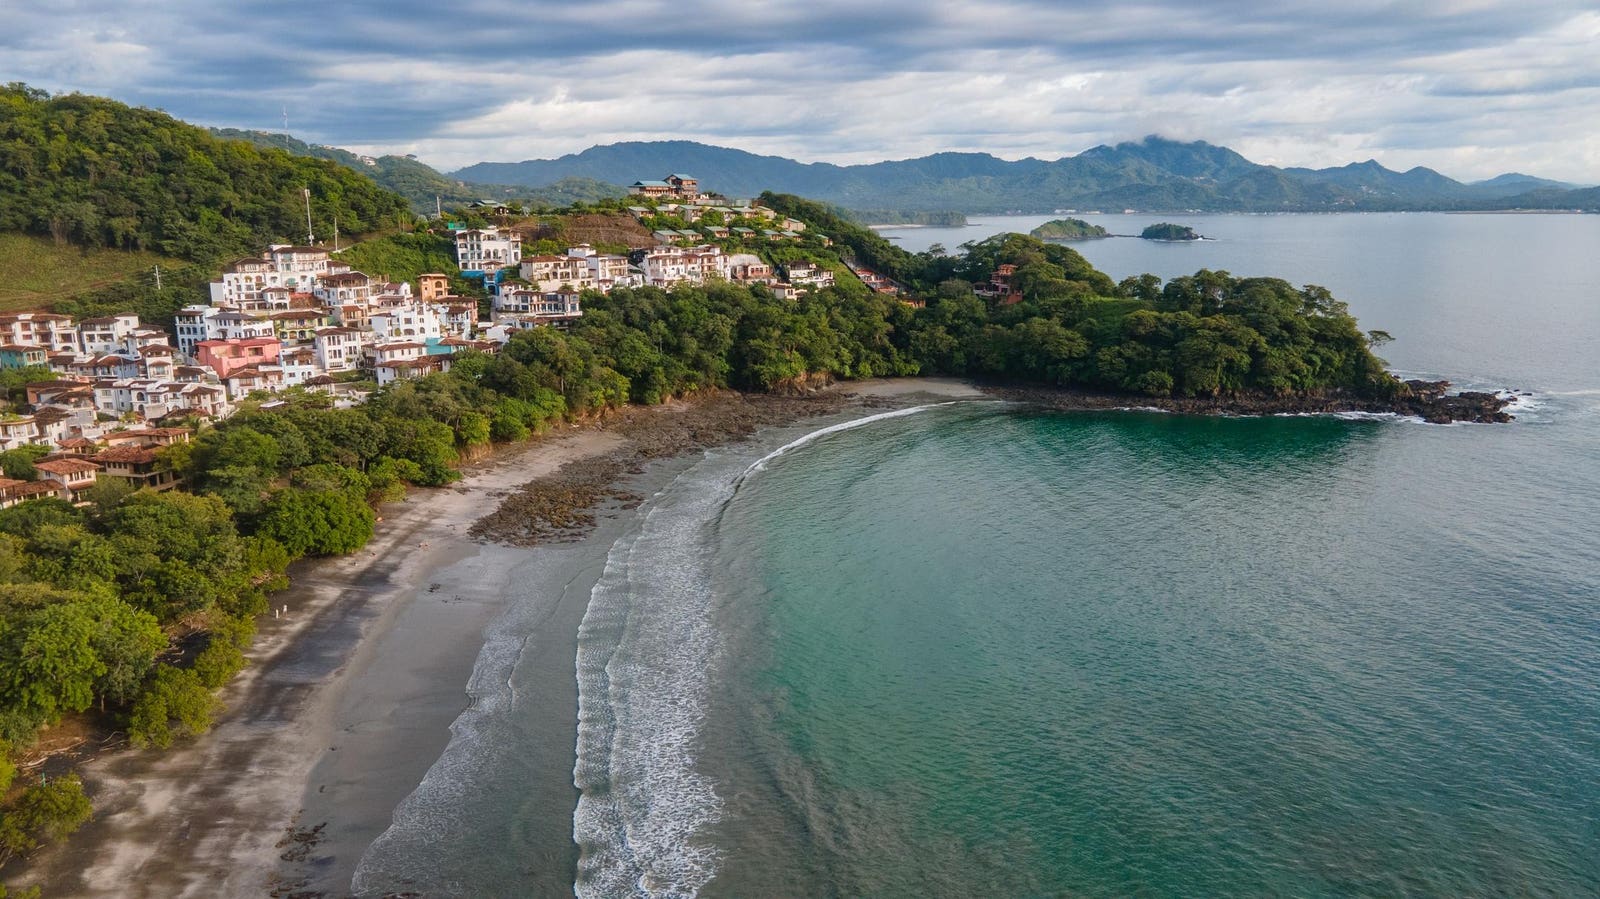 This Town Is The Amalfi Coast Of Costa Rica